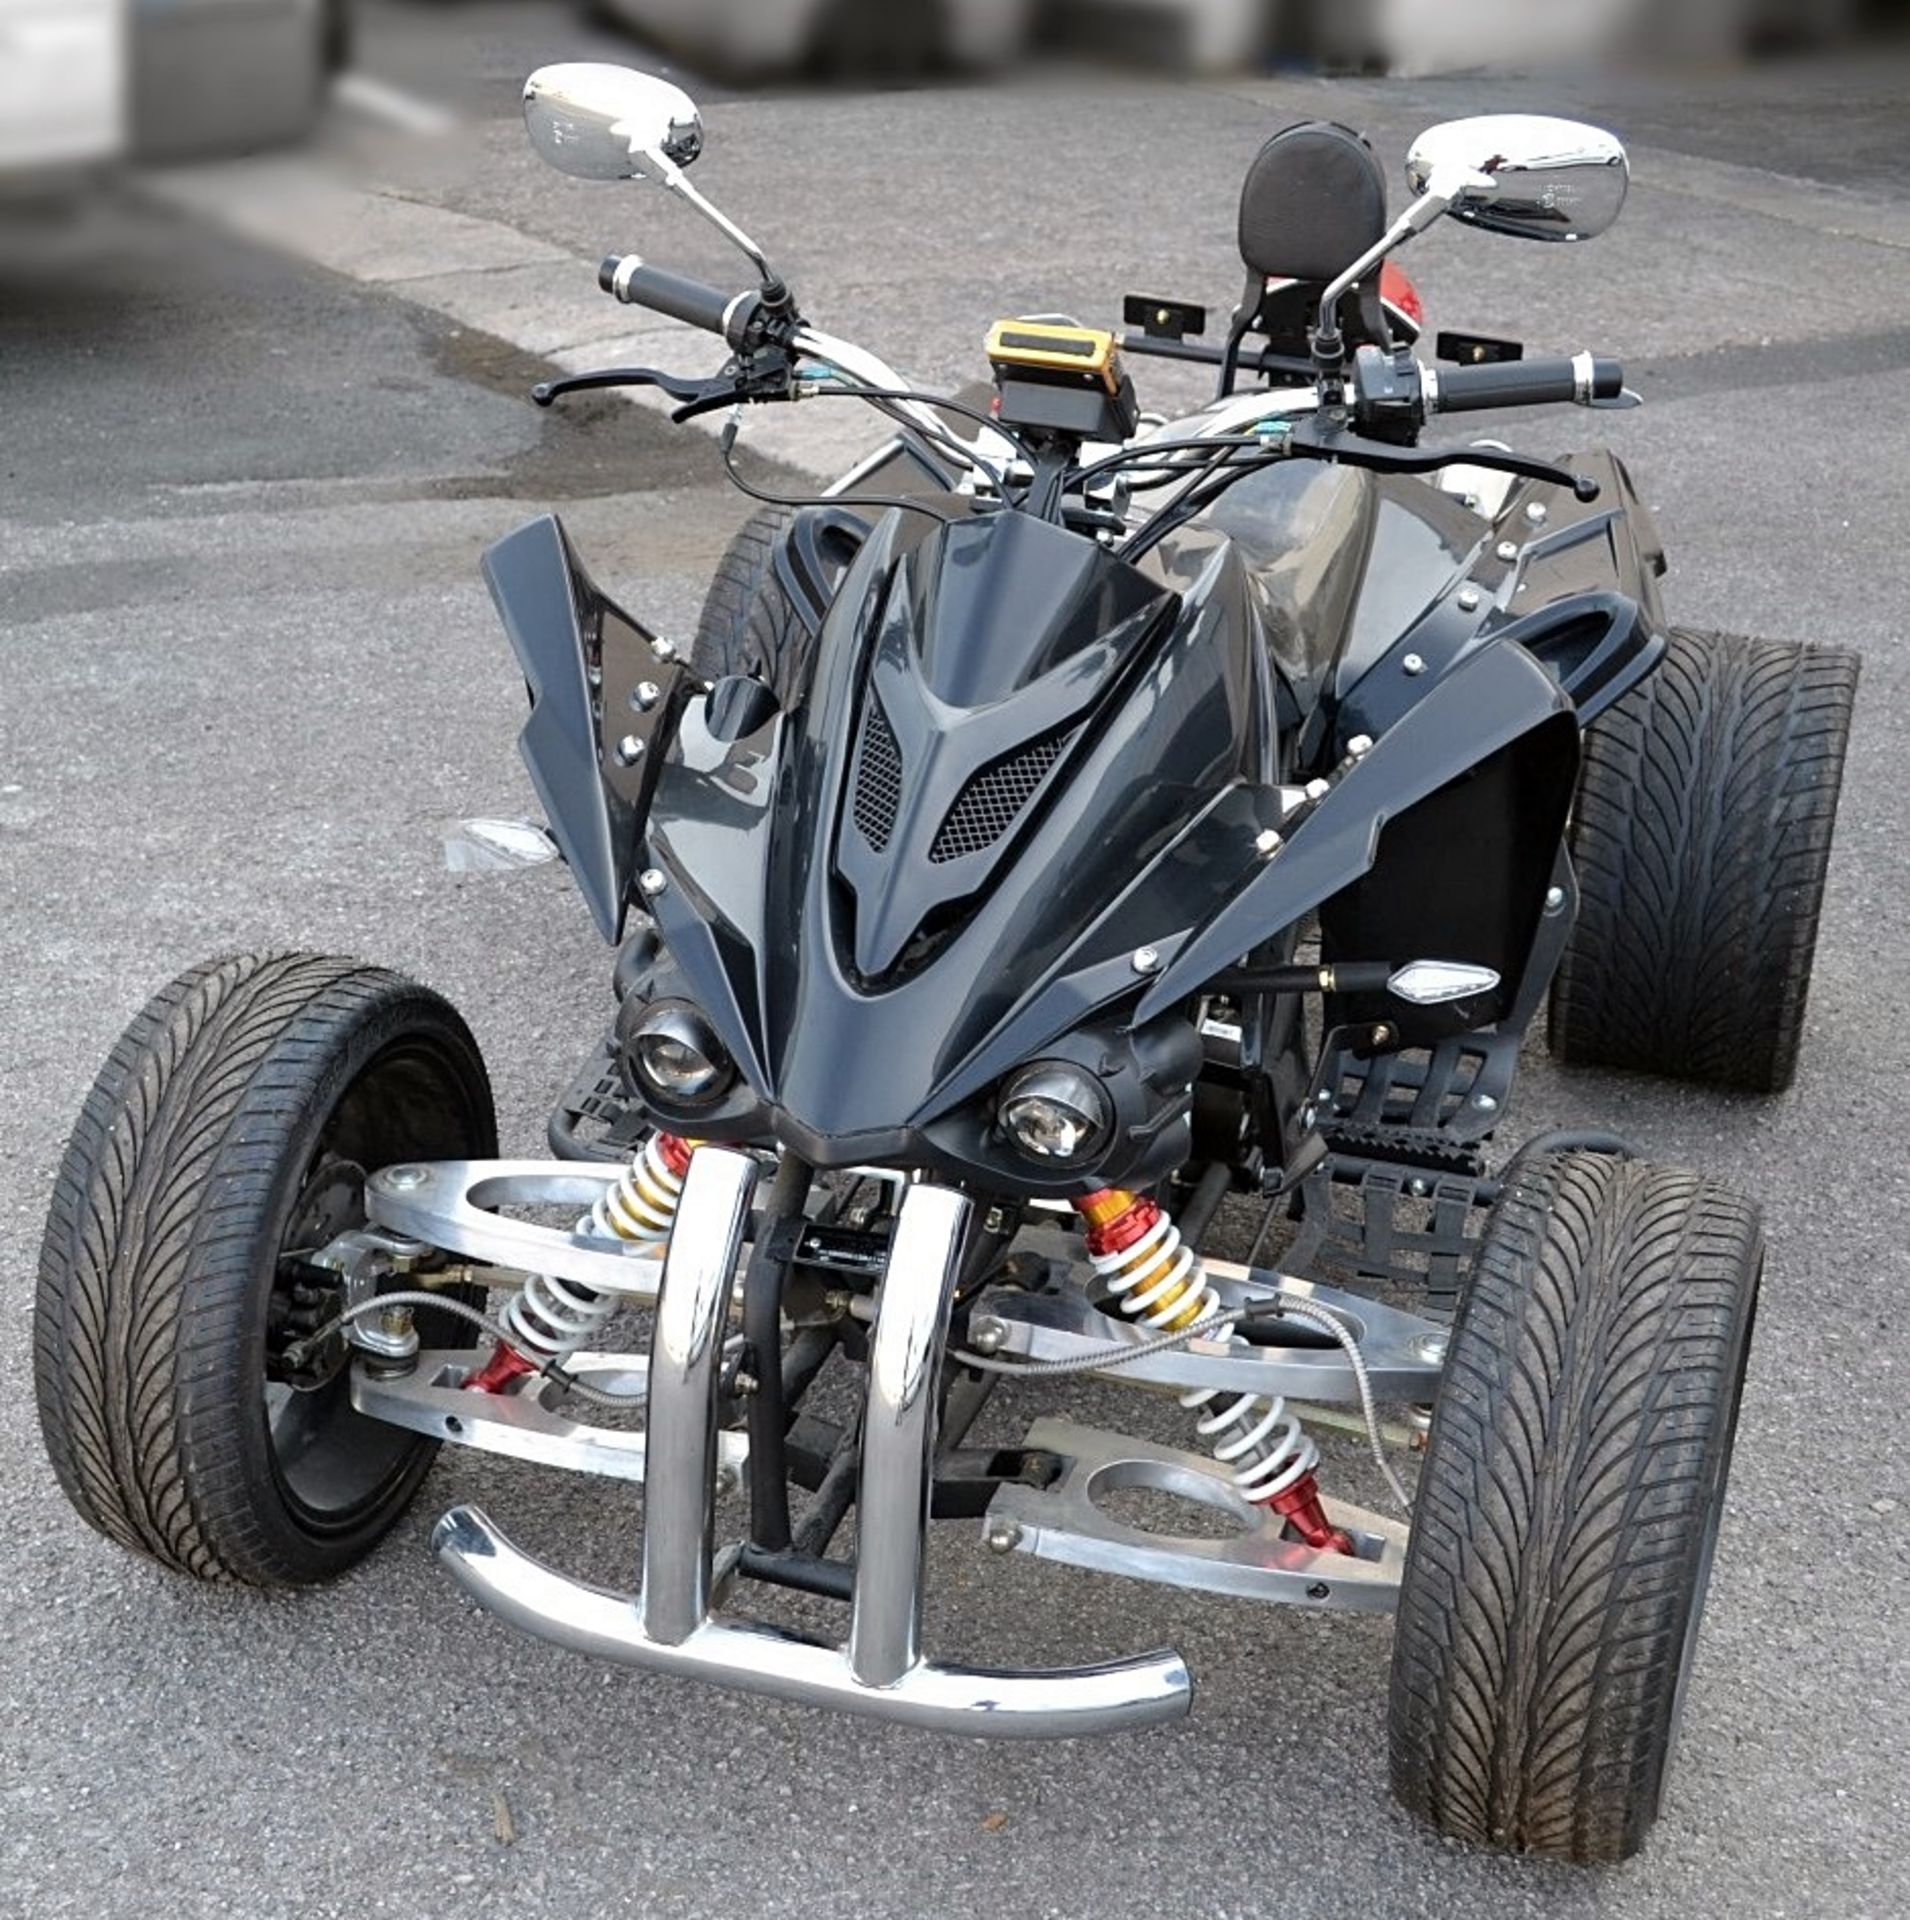 1 x Jinling ATV Adult Quad Bike - 250cc - Colour: Black - Pre-owned In Good Overall Condition With